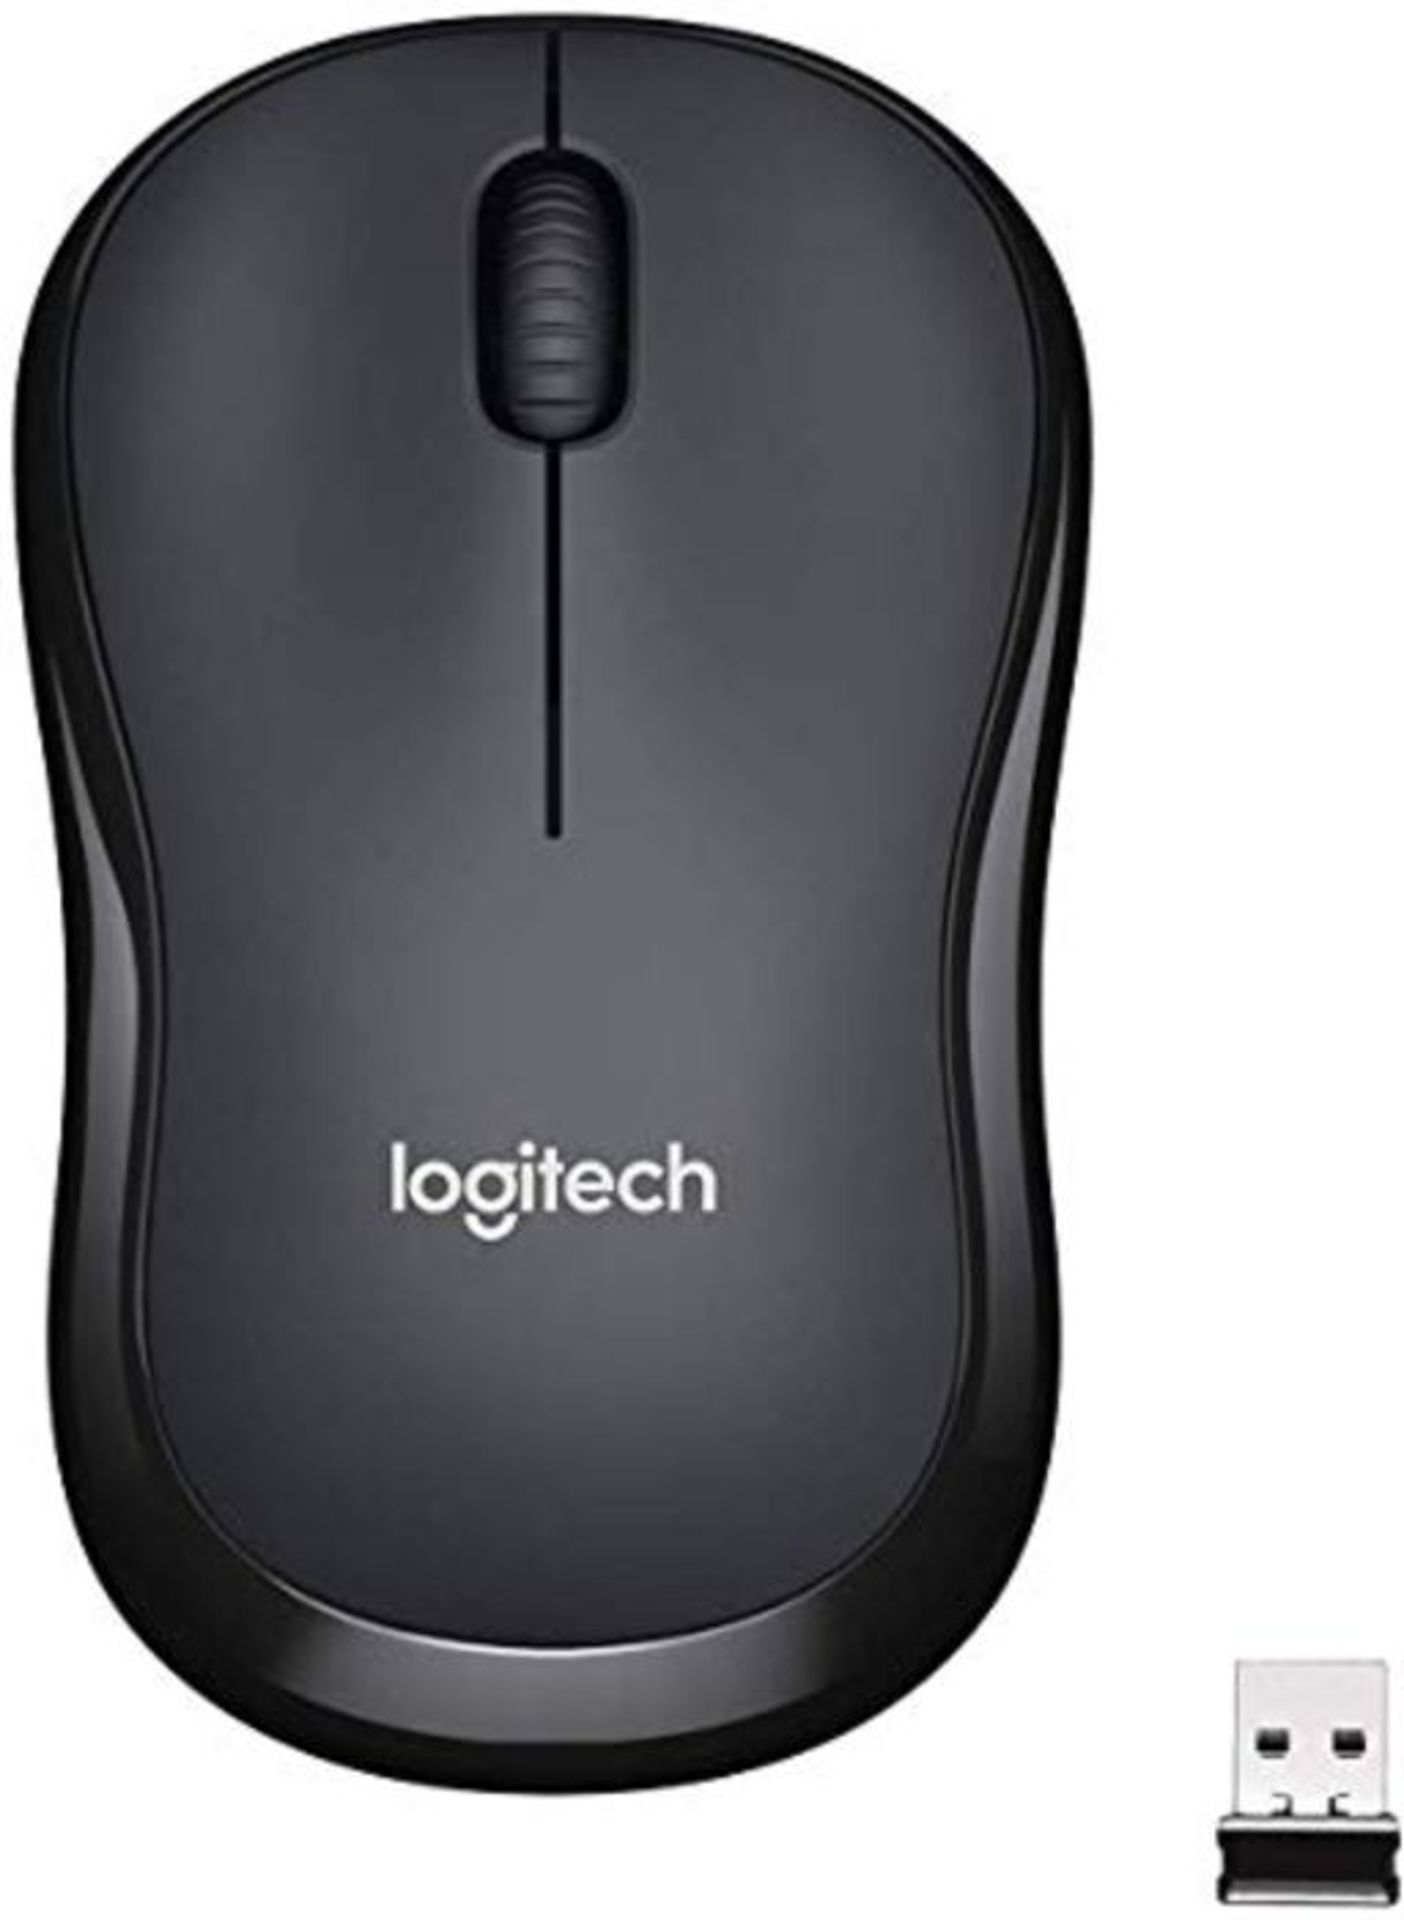 Logitech M220 Wireless Mouse, Silent Buttons, 2.4 GHz with USB Mini Receiver, 1000 DPI